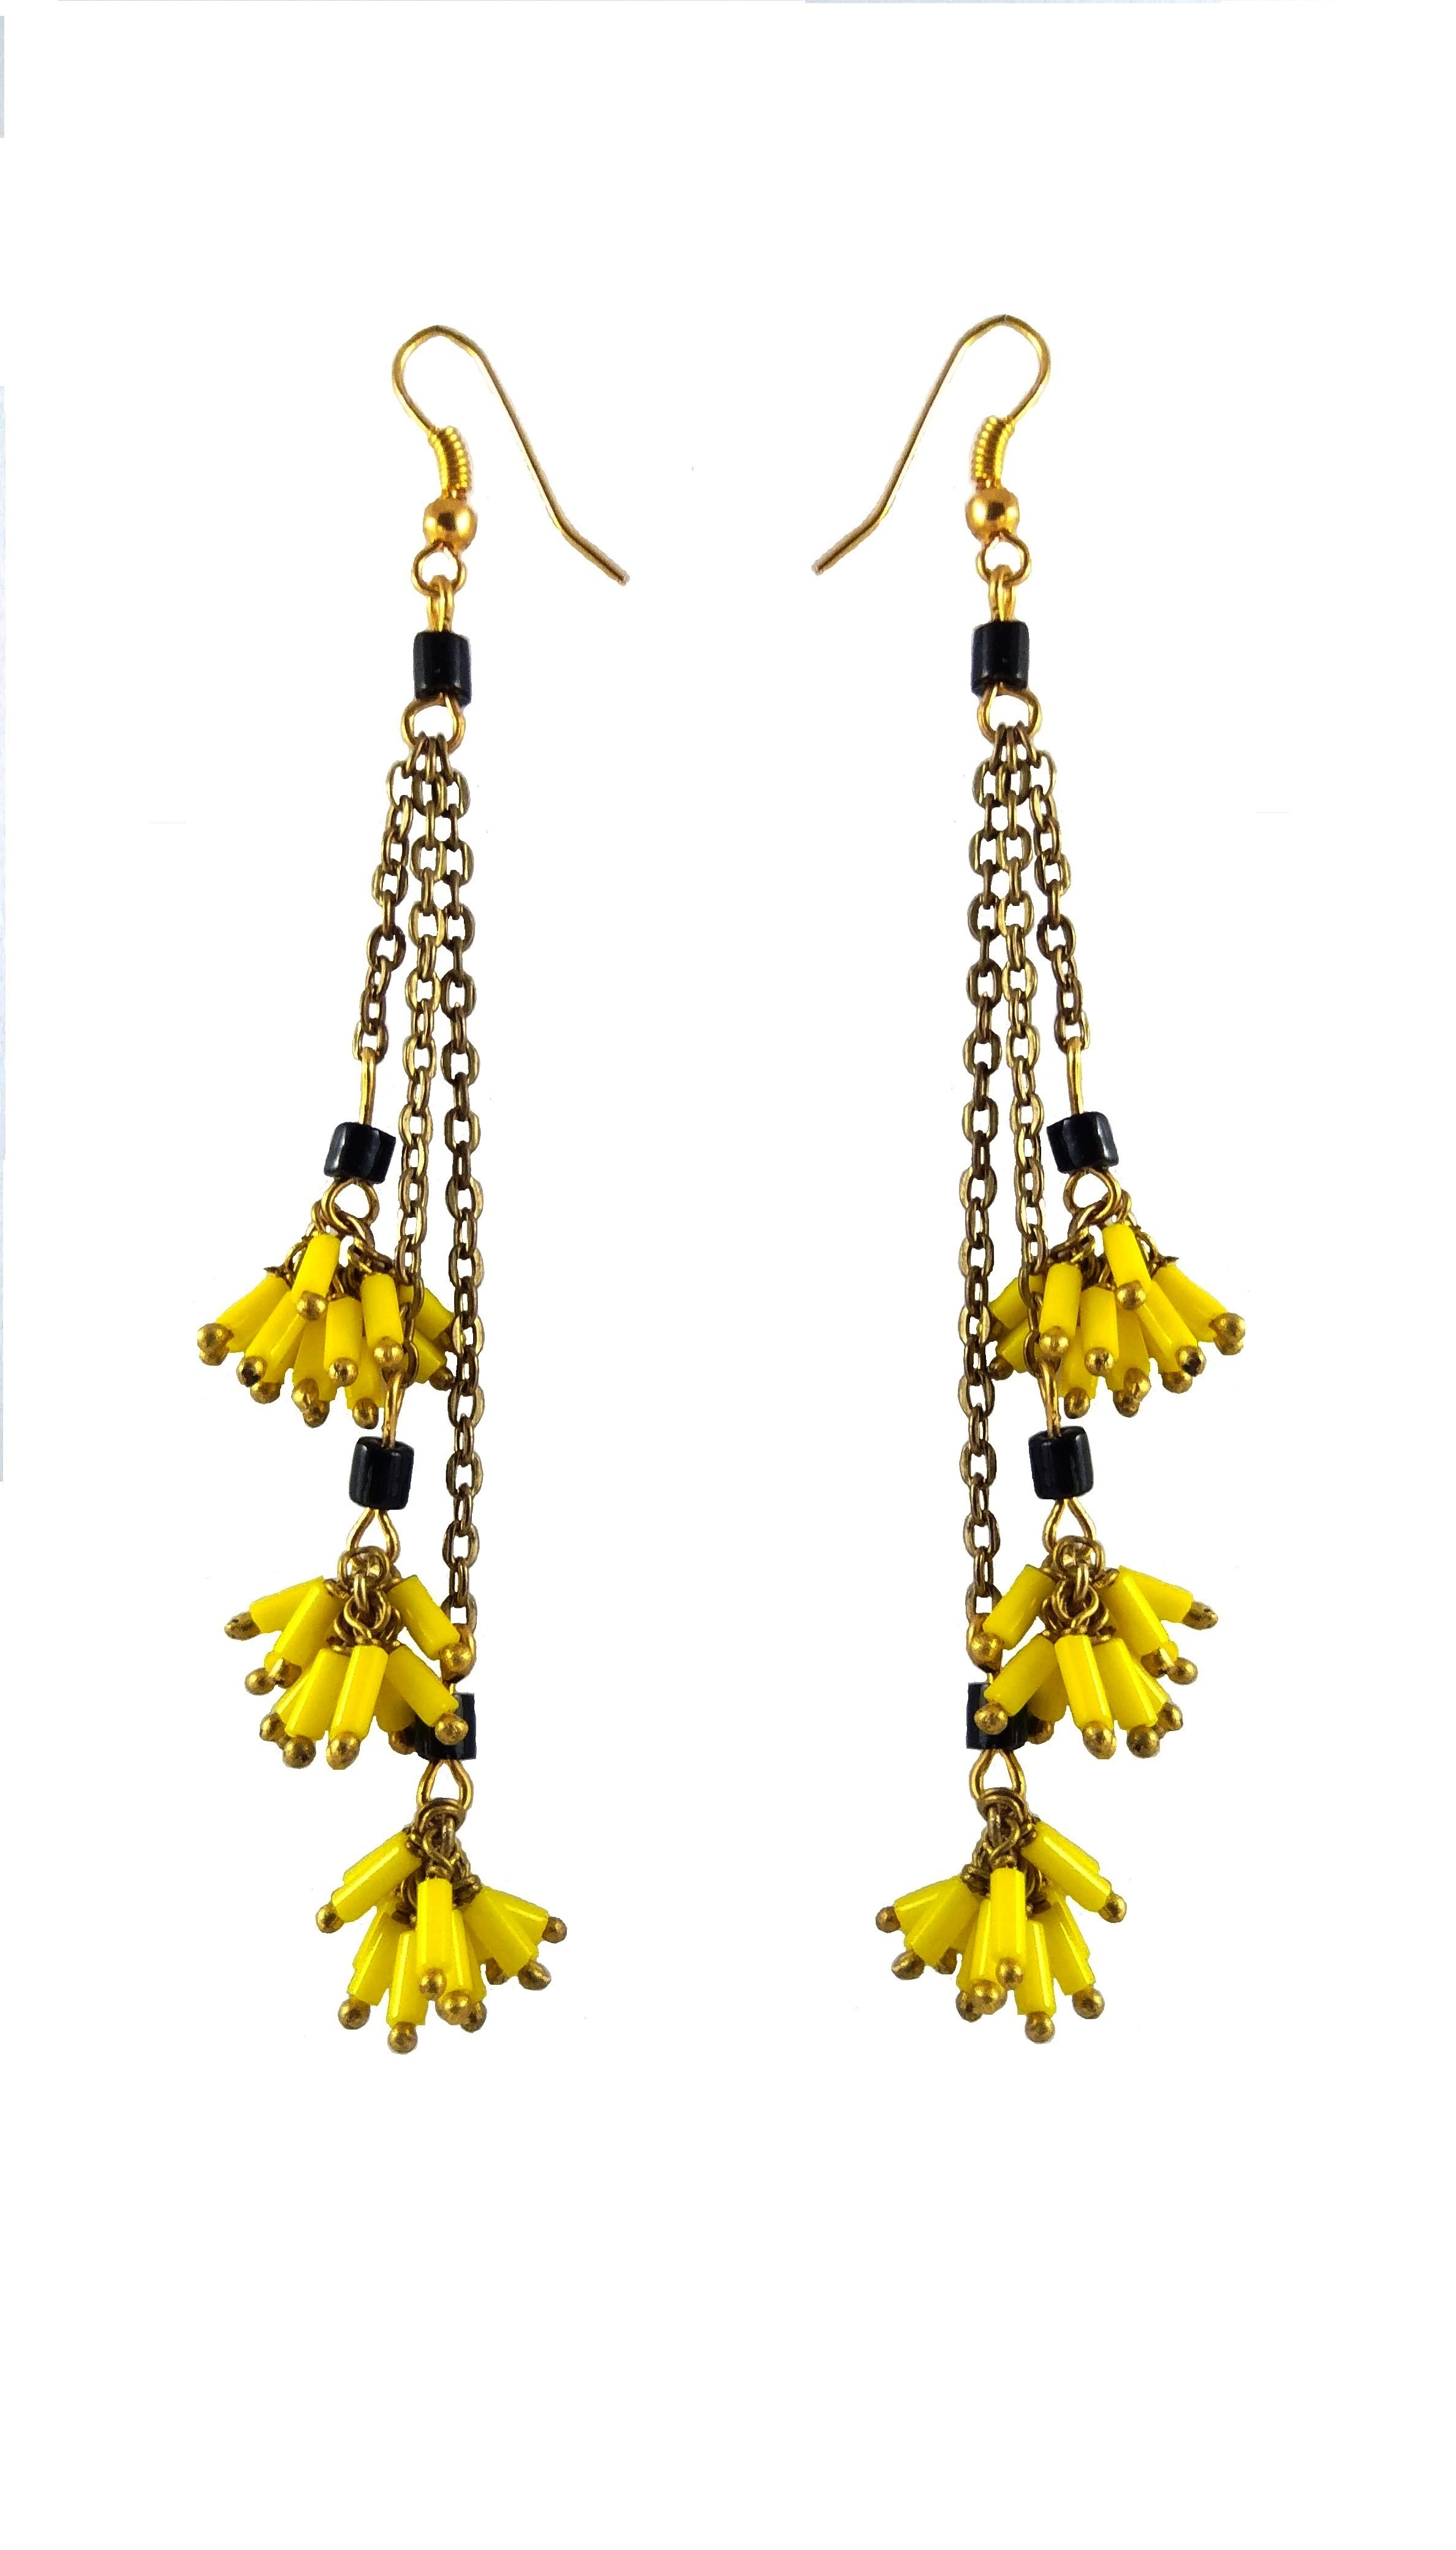  hand made earrings antique style with chain and yellow colour